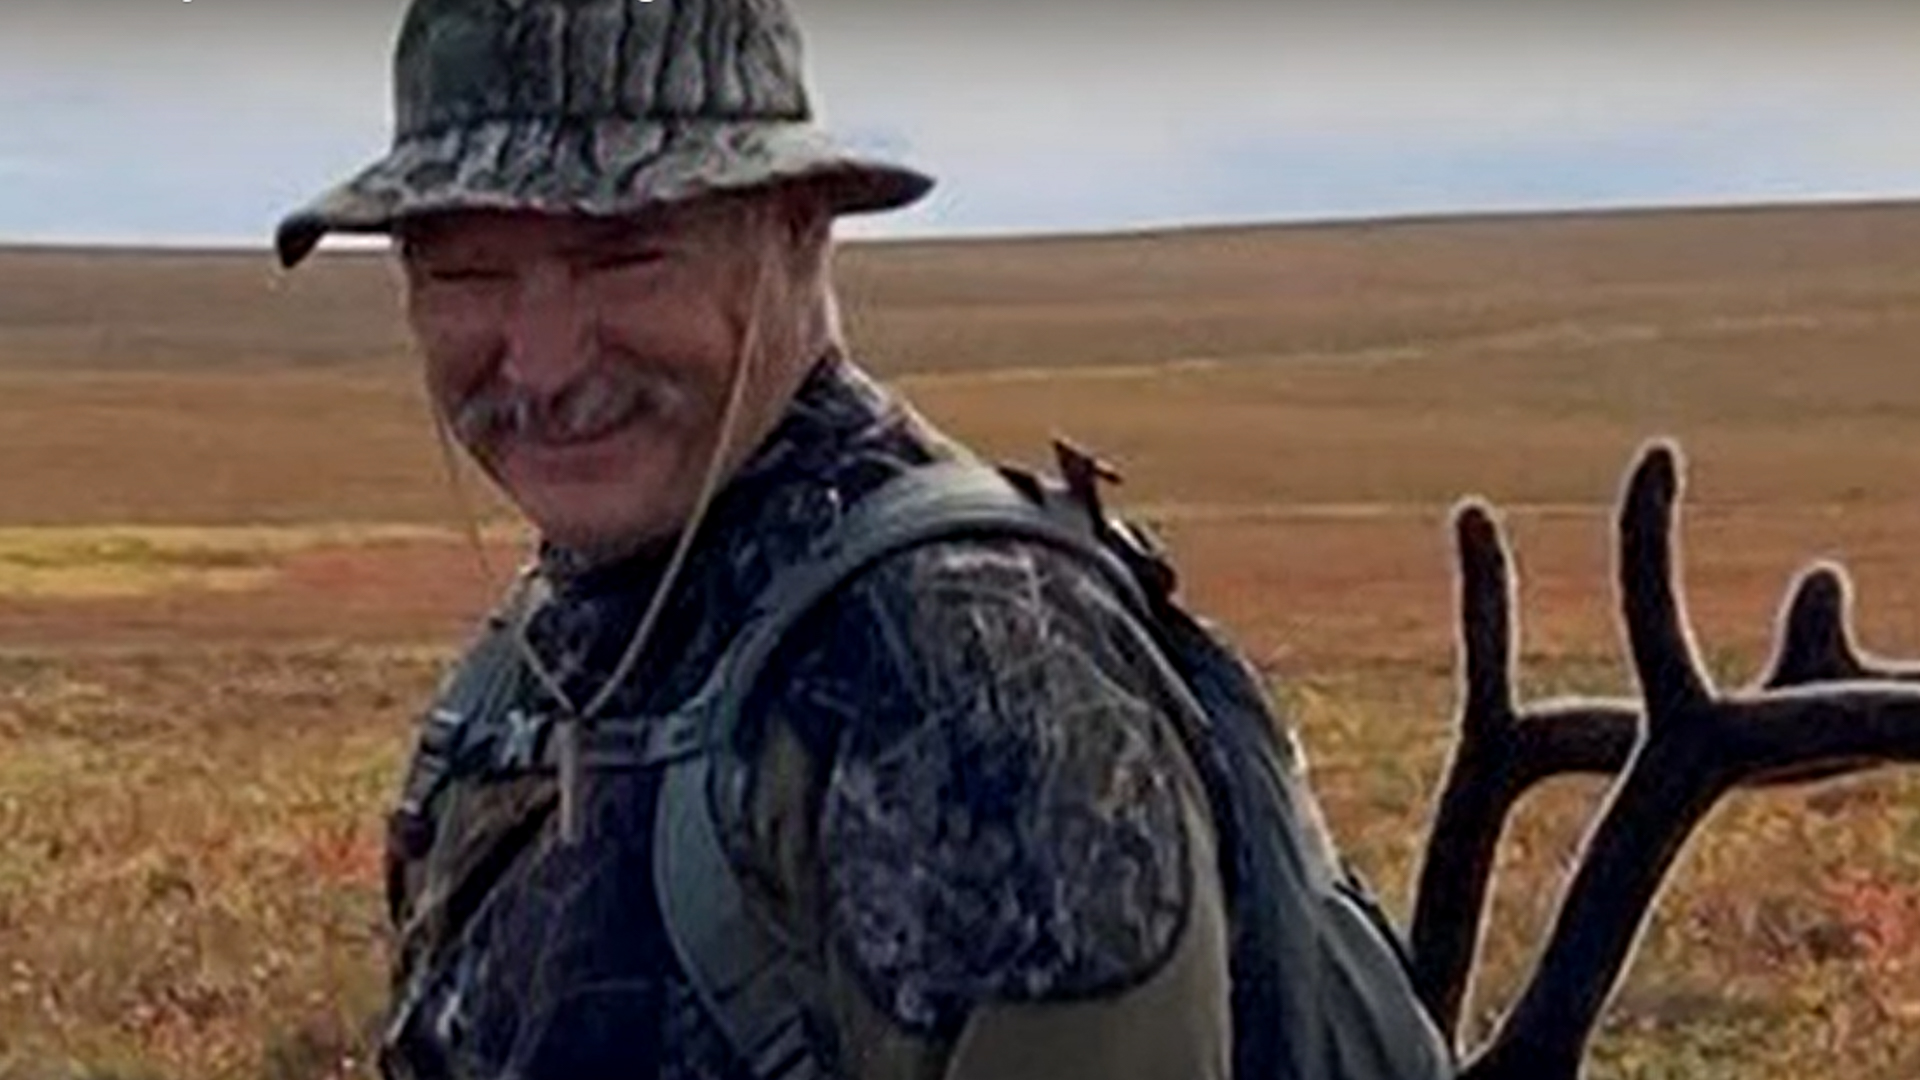 Search Continues For Missing Caribou Hunter In Alaska